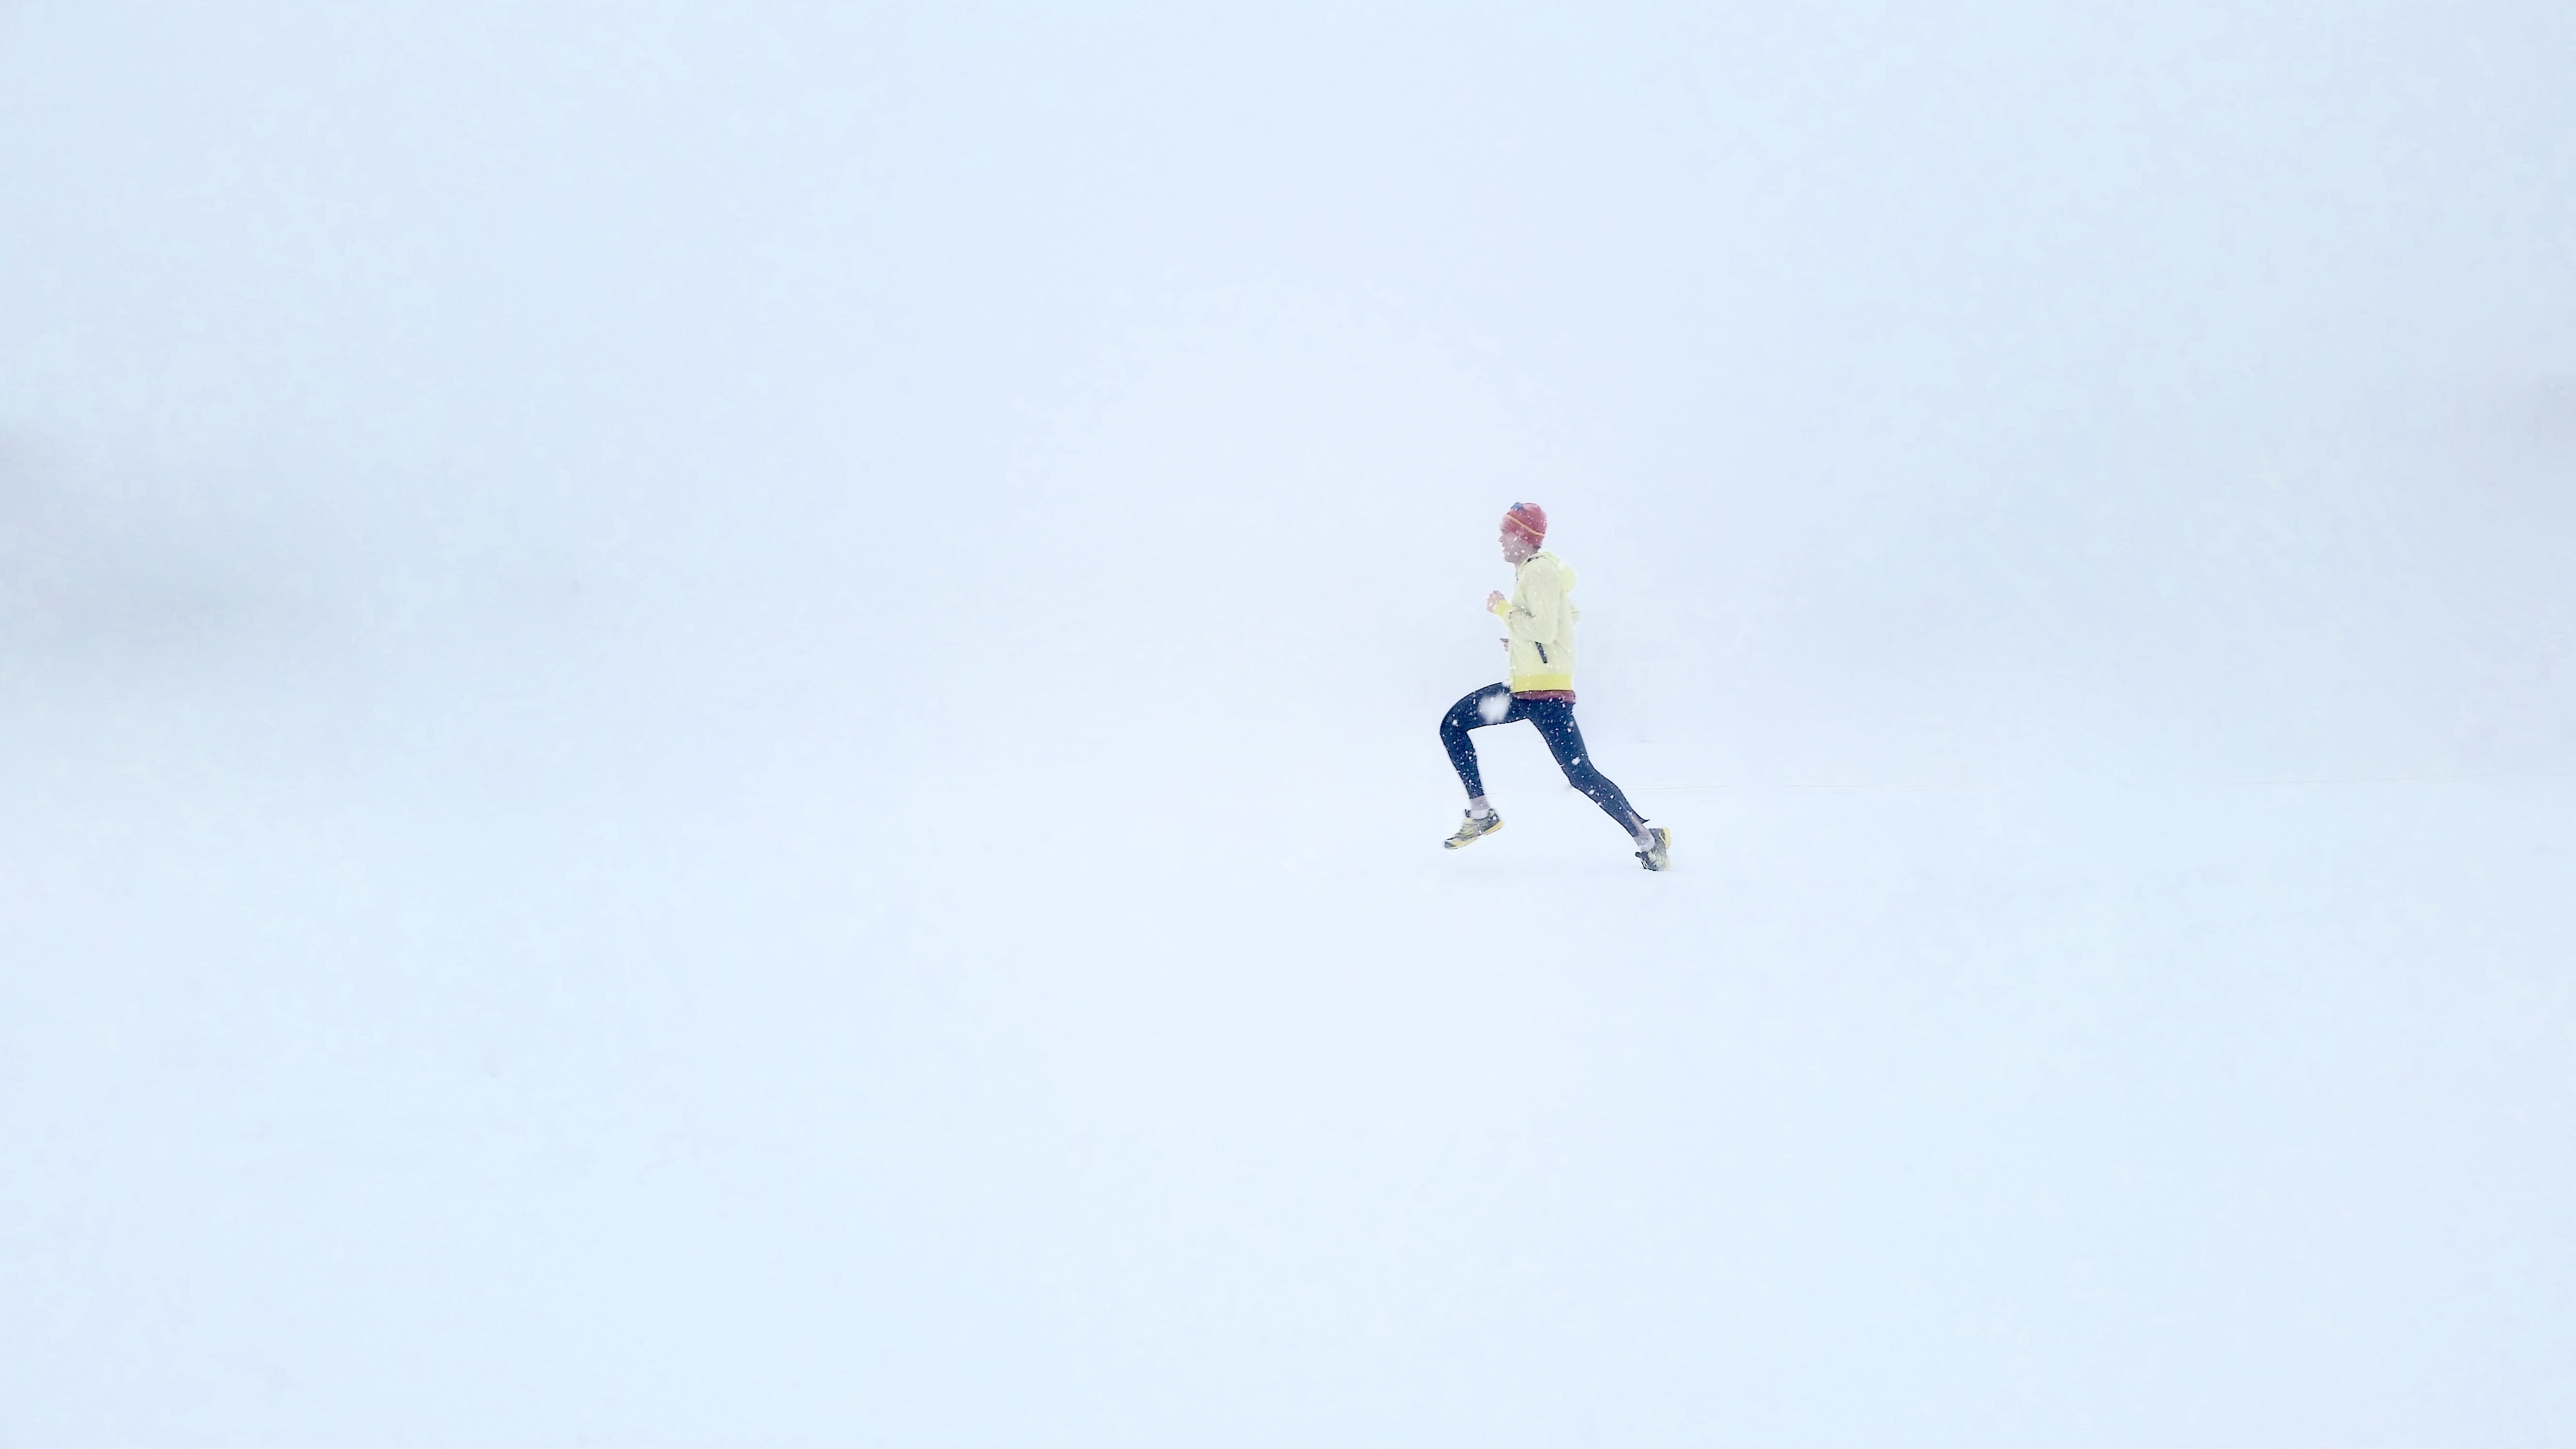 person wearing yellow jacket and black pants, person in yellow sweatshirt and black pants running in white room